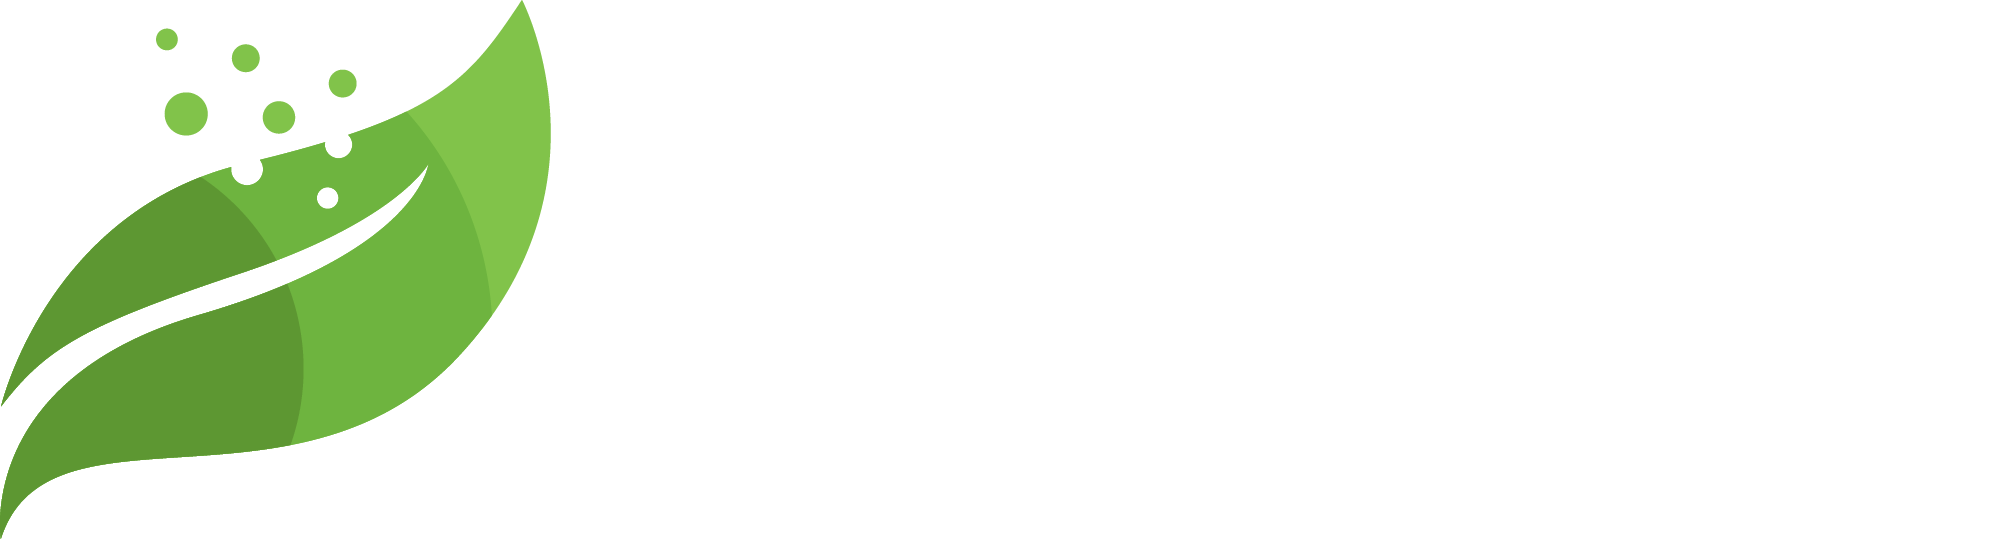 Nature Trading Group